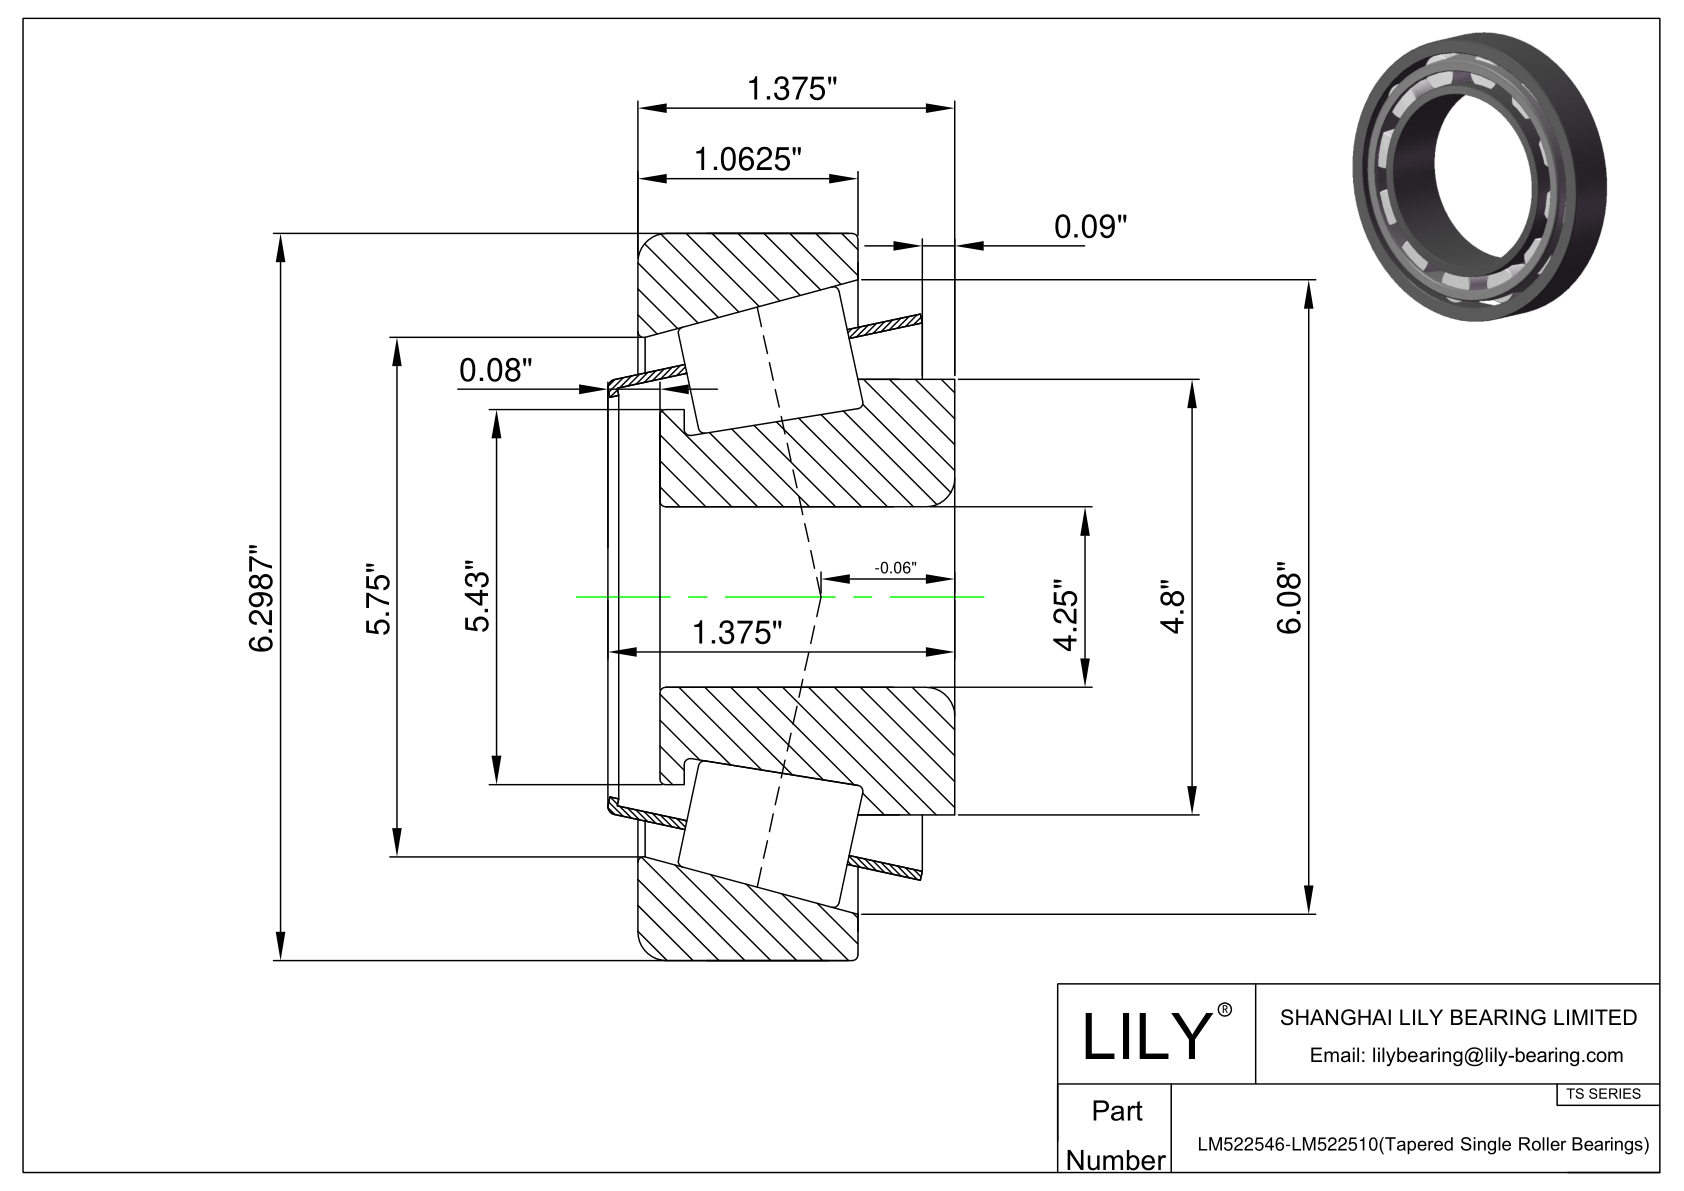 LM522546-LM522510 TS (Tapered Single Roller Bearings) (Imperial) cad drawing